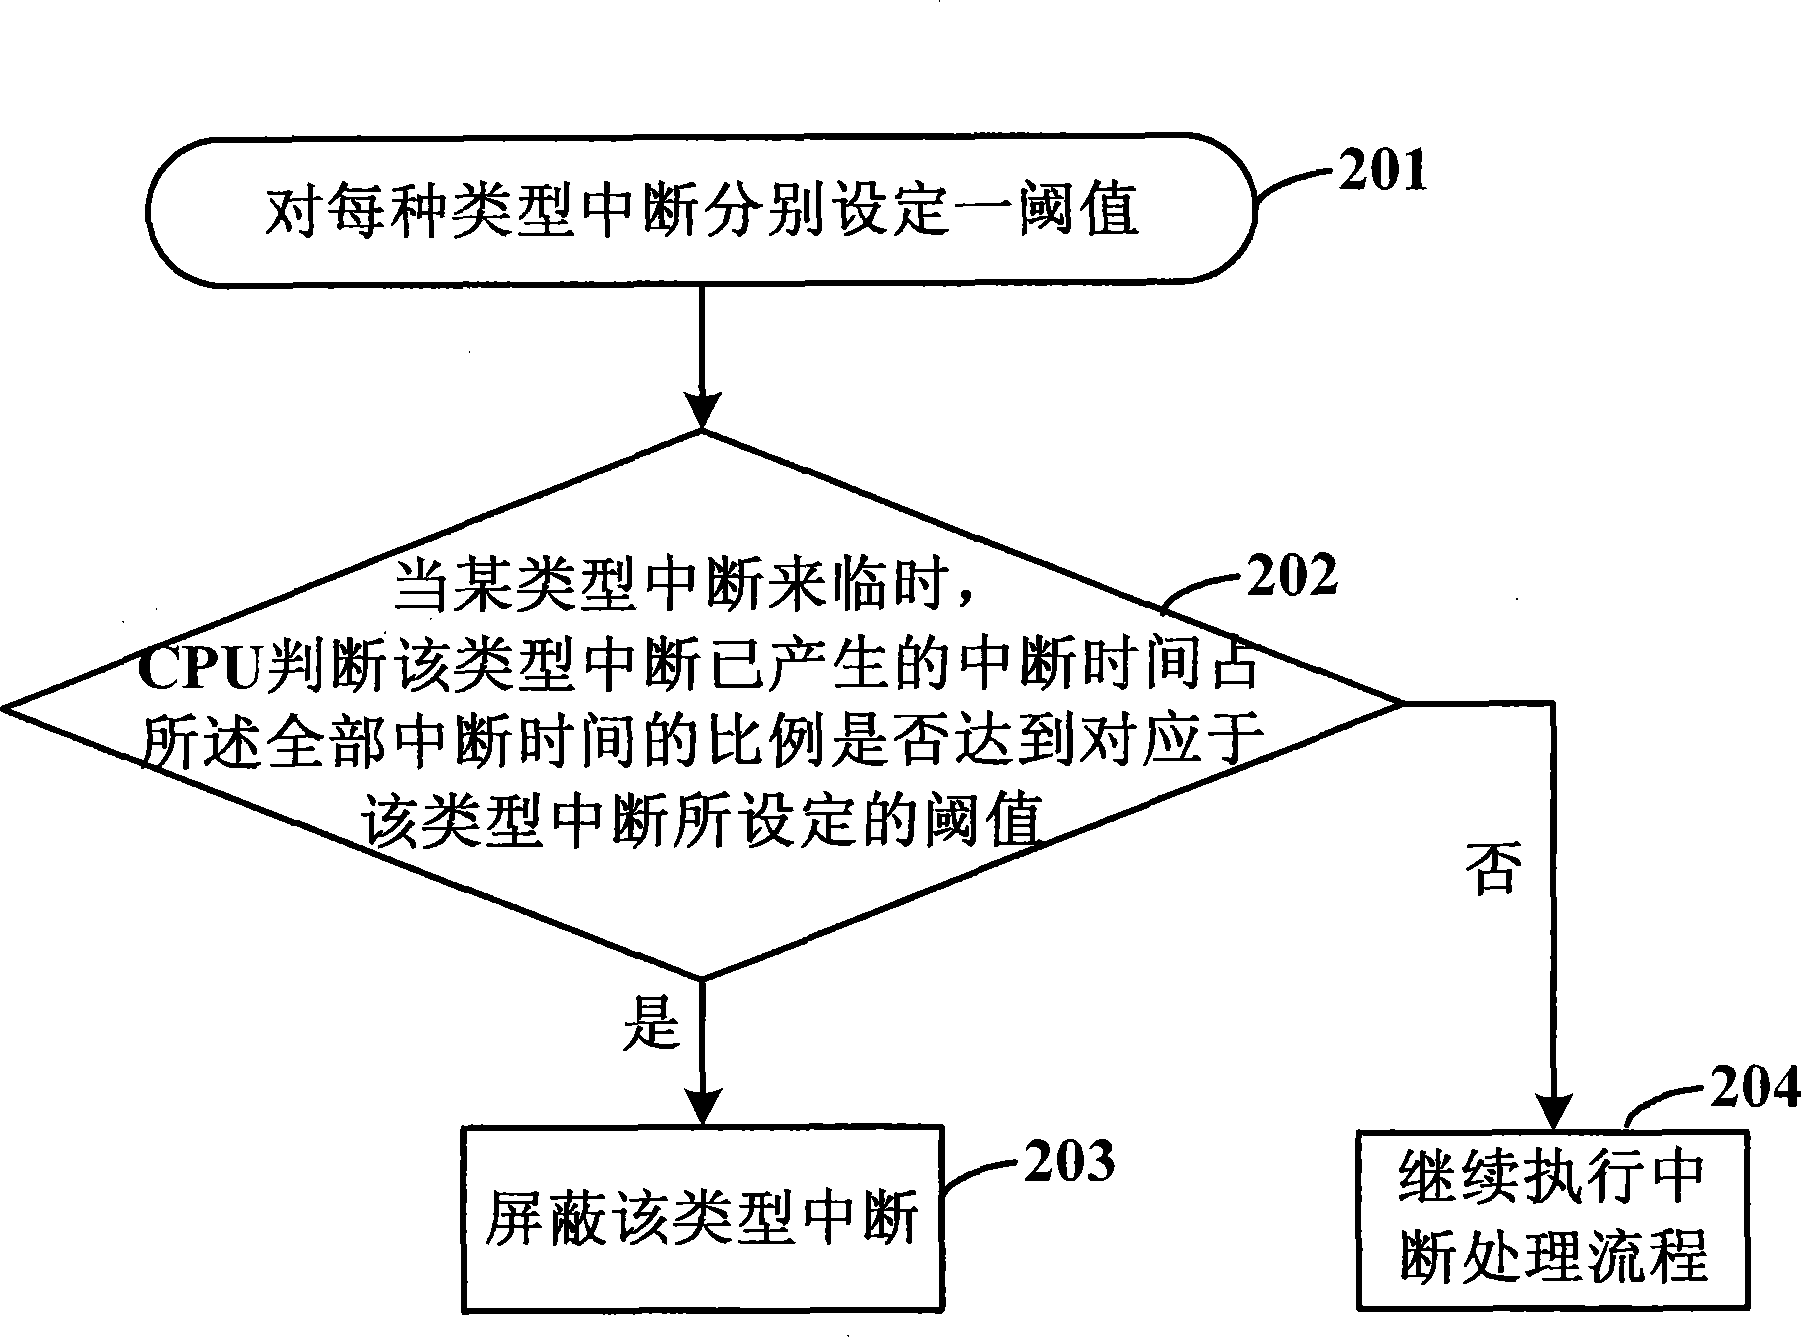 Method for real-time operating system to avoid interrupt occupying excess CPU resources